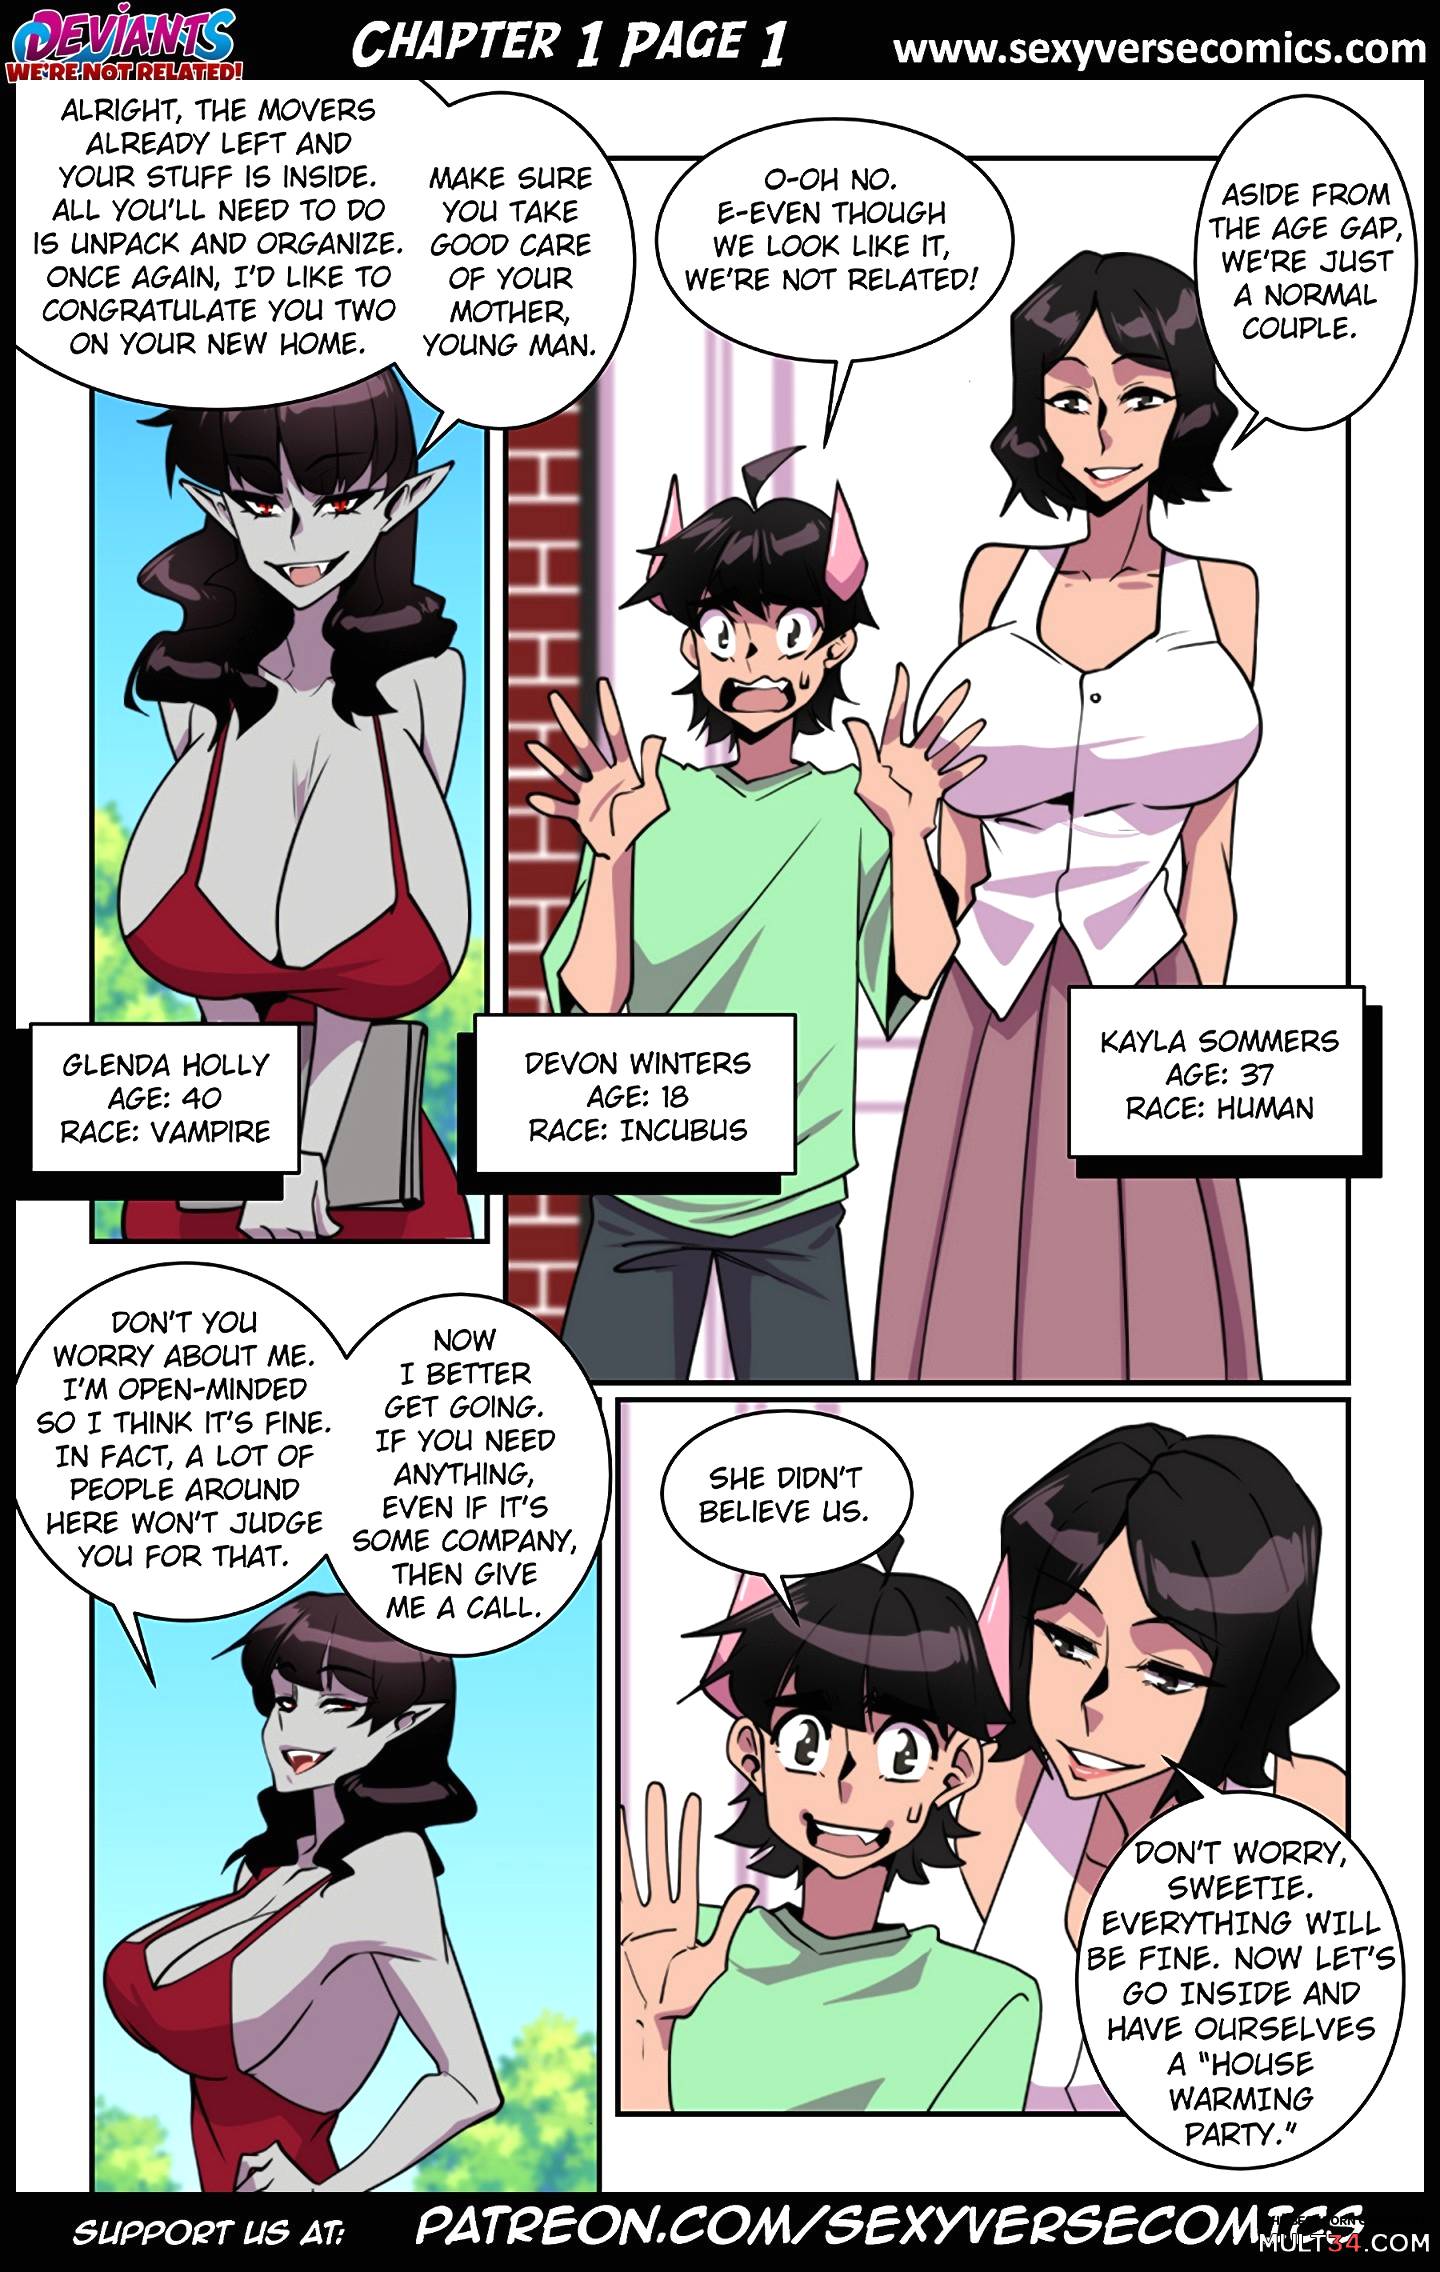 Deviants: We’re Not Related! page 2